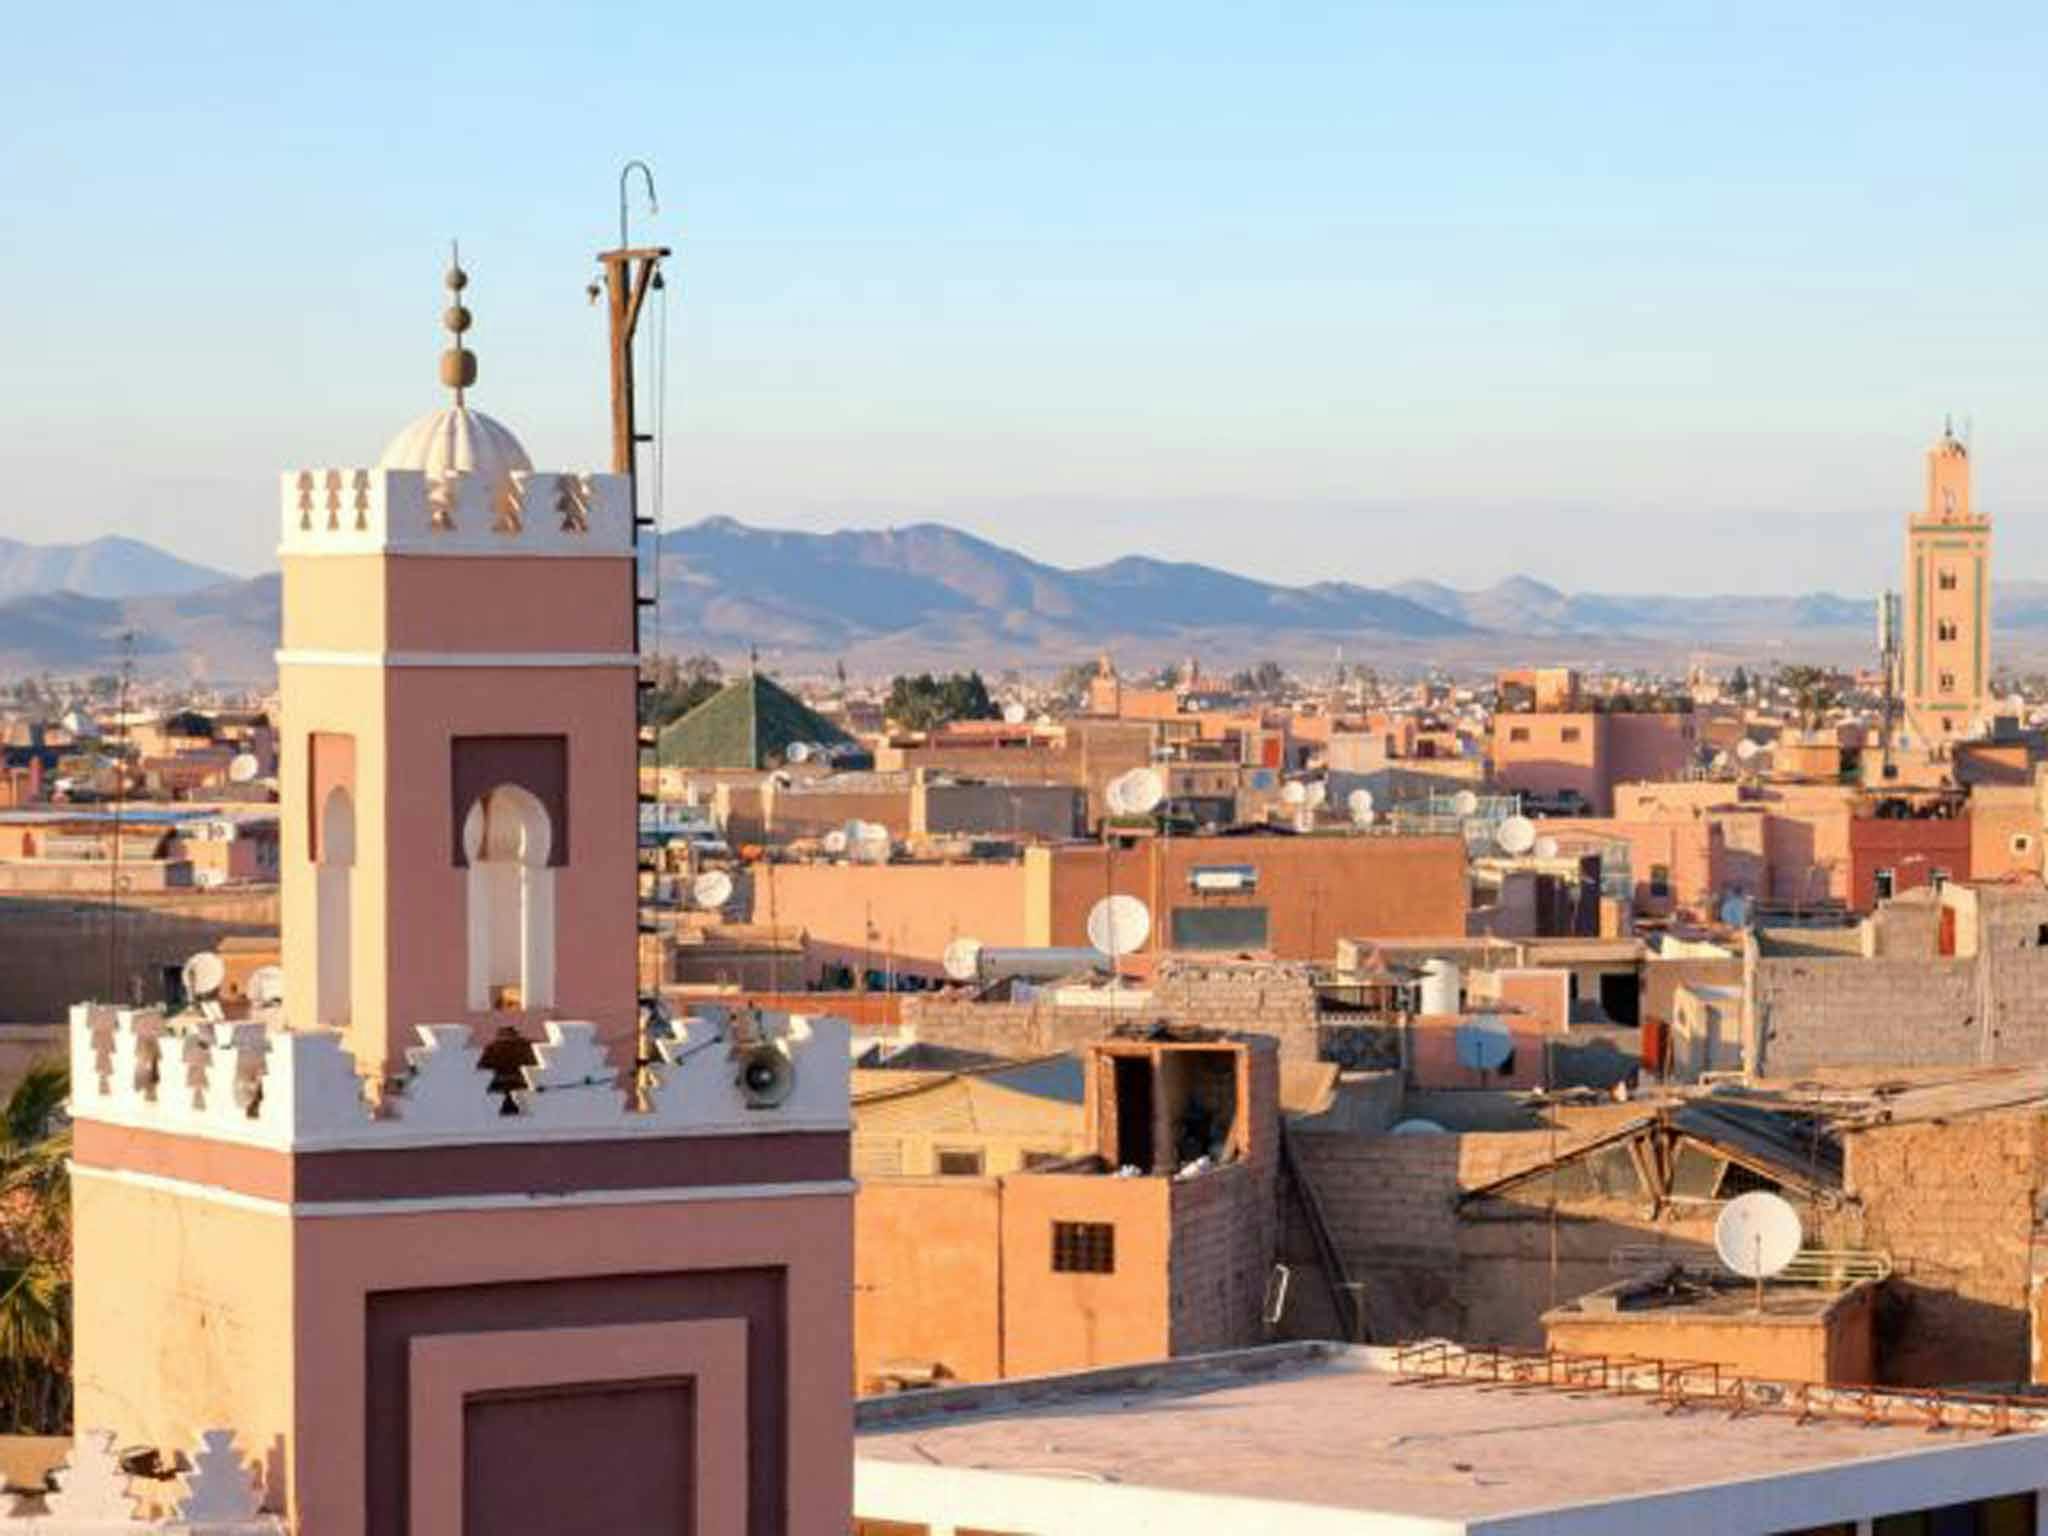 Image - 48 Hours in Marrakech: Where to go and what to see